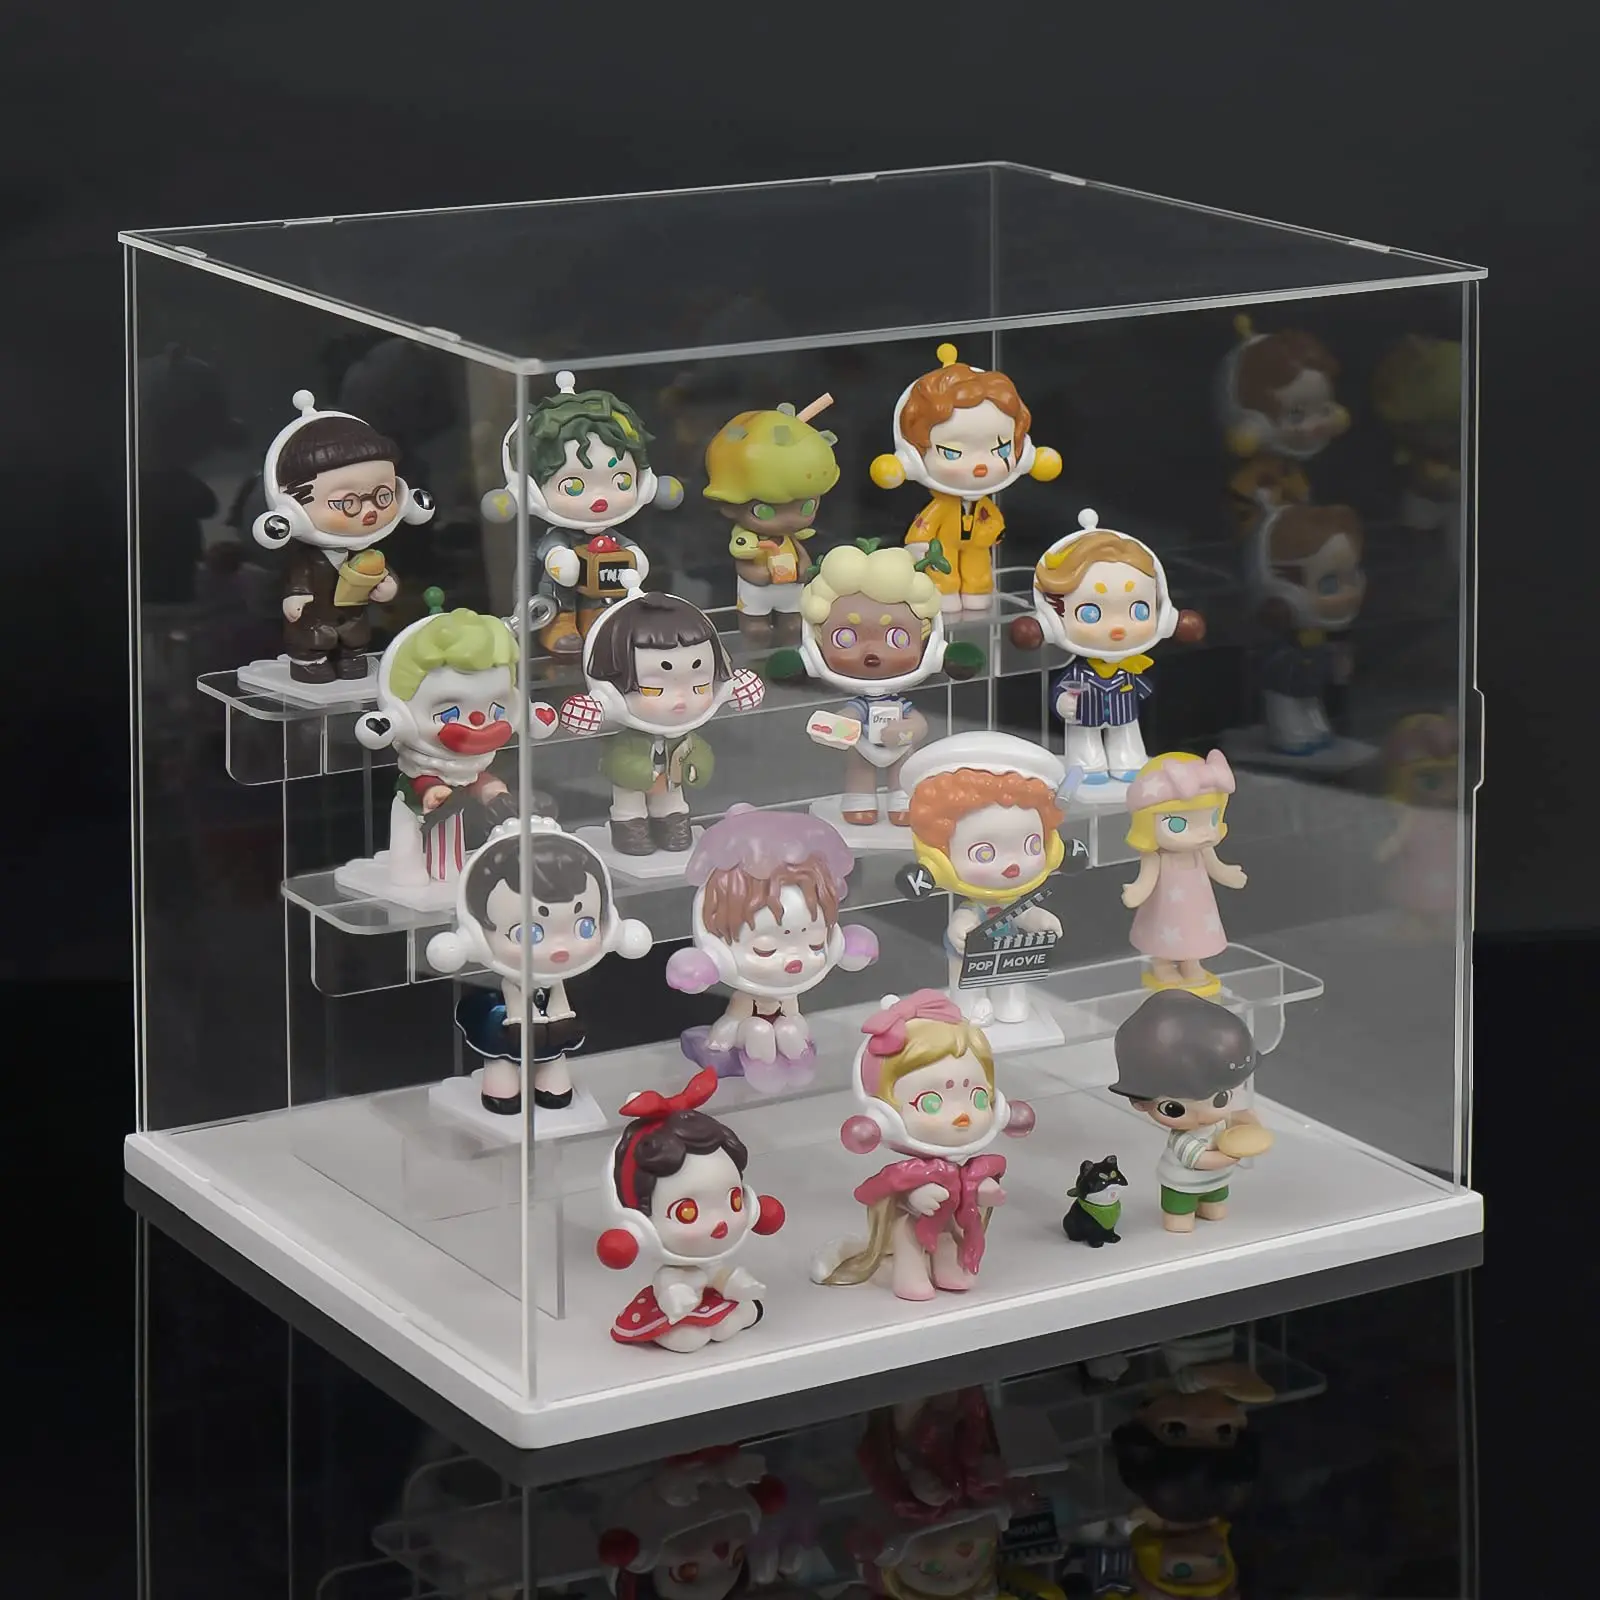 

Acrylic Display Case Clear Storage Box Countertop Cube for Collectibles,Action Figures, Miniature Figurines Dustproof Protection